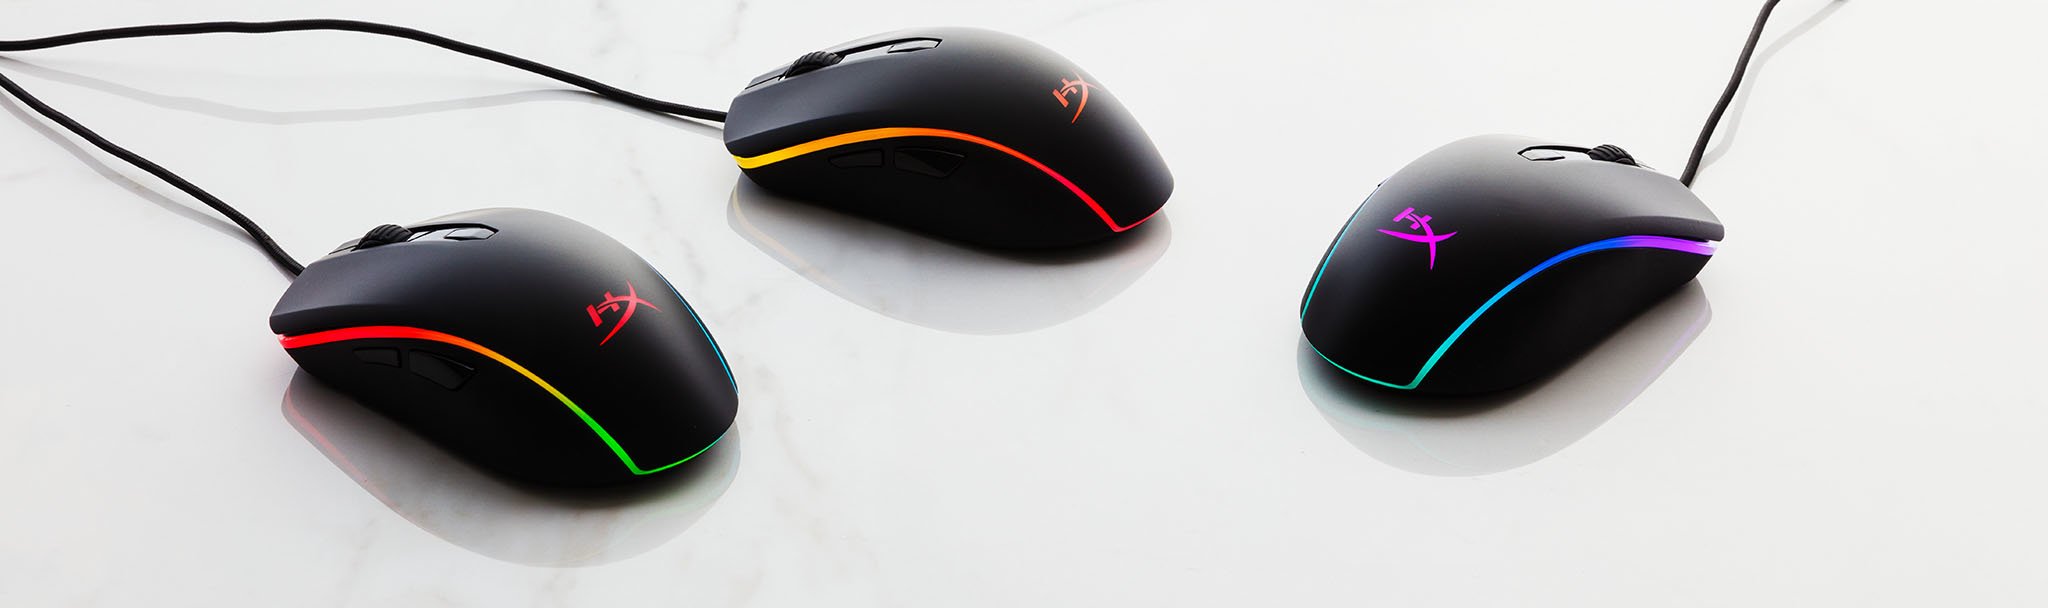 Mouse the TECHJUNKIES mouse - yet? best Pulsefire Gaming | HyperX RGB RGB Surge